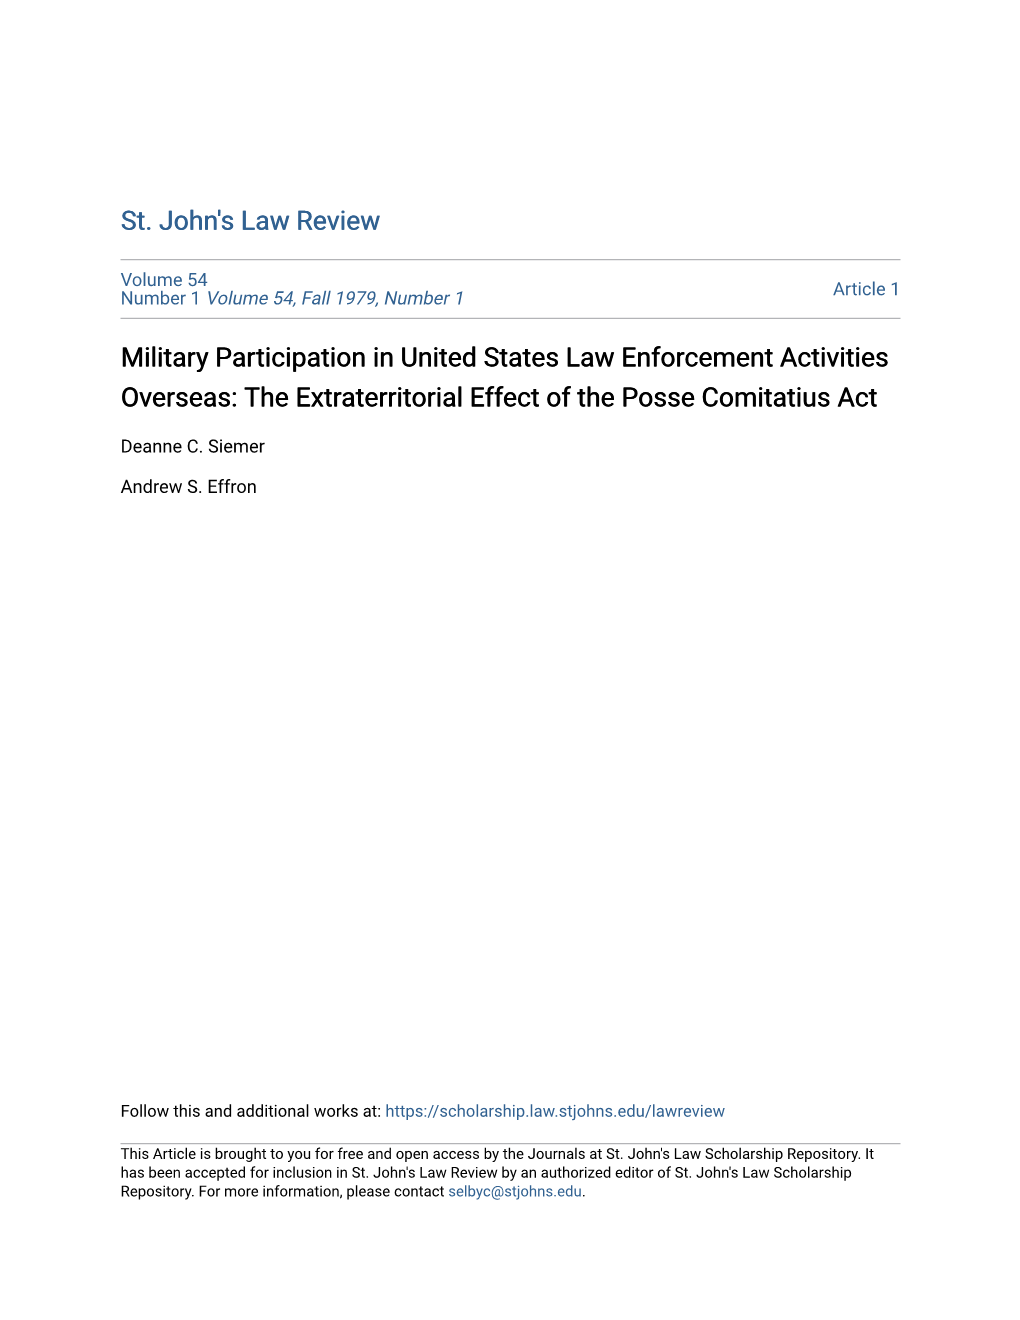 Military Participation in United States Law Enforcement Activities Overseas: the Extraterritorial Effect of the Posse Comitatius Act